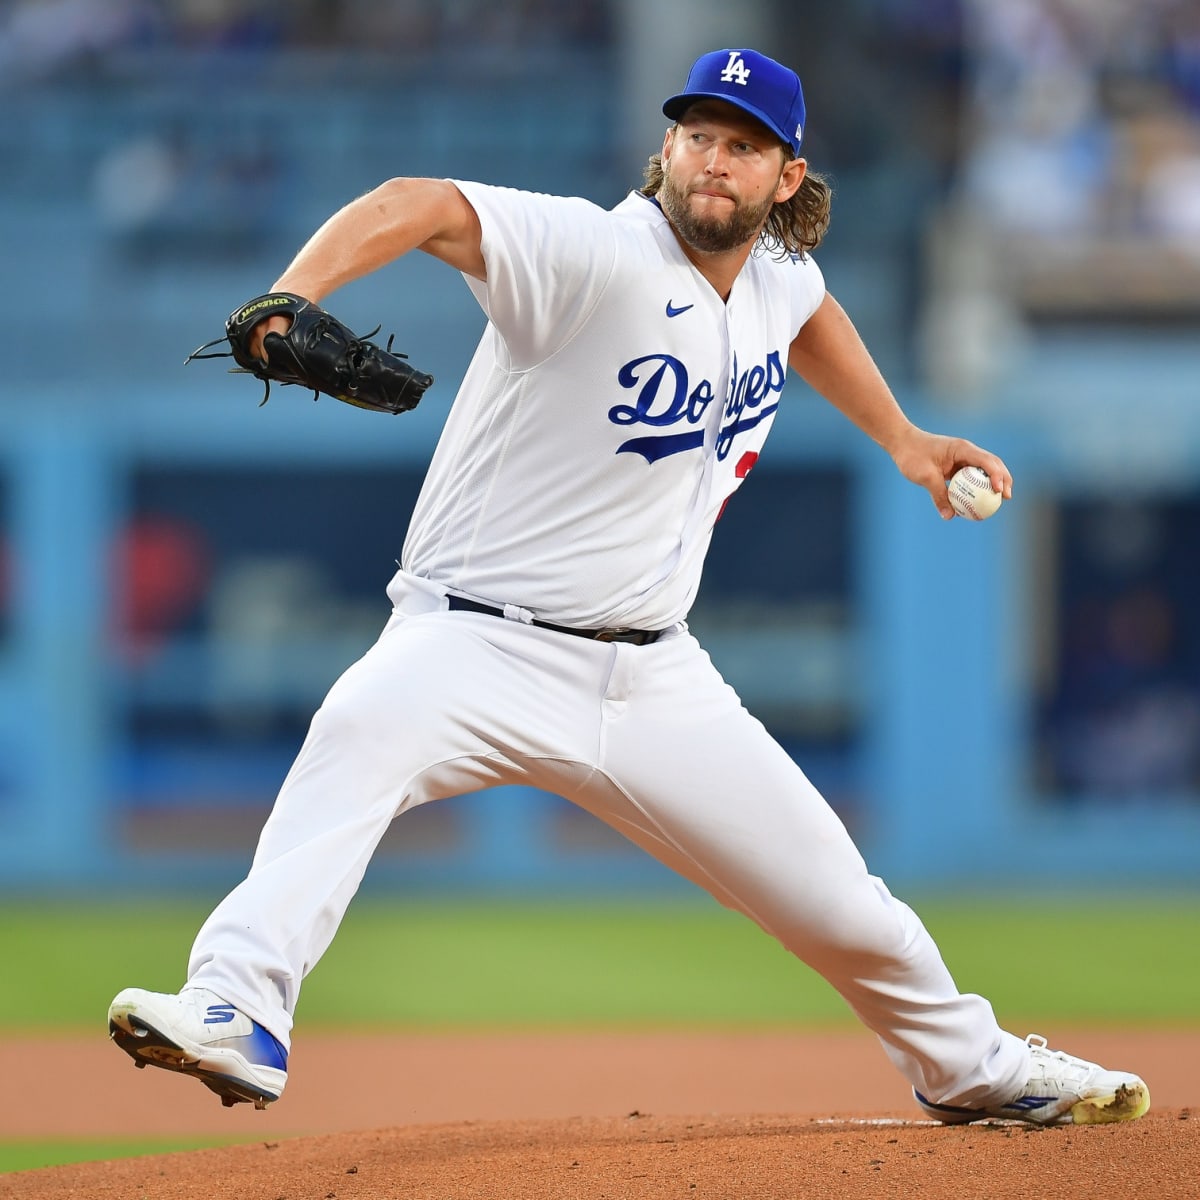 Dodgers news: Clayton Kershaw will start Game 1 of the World